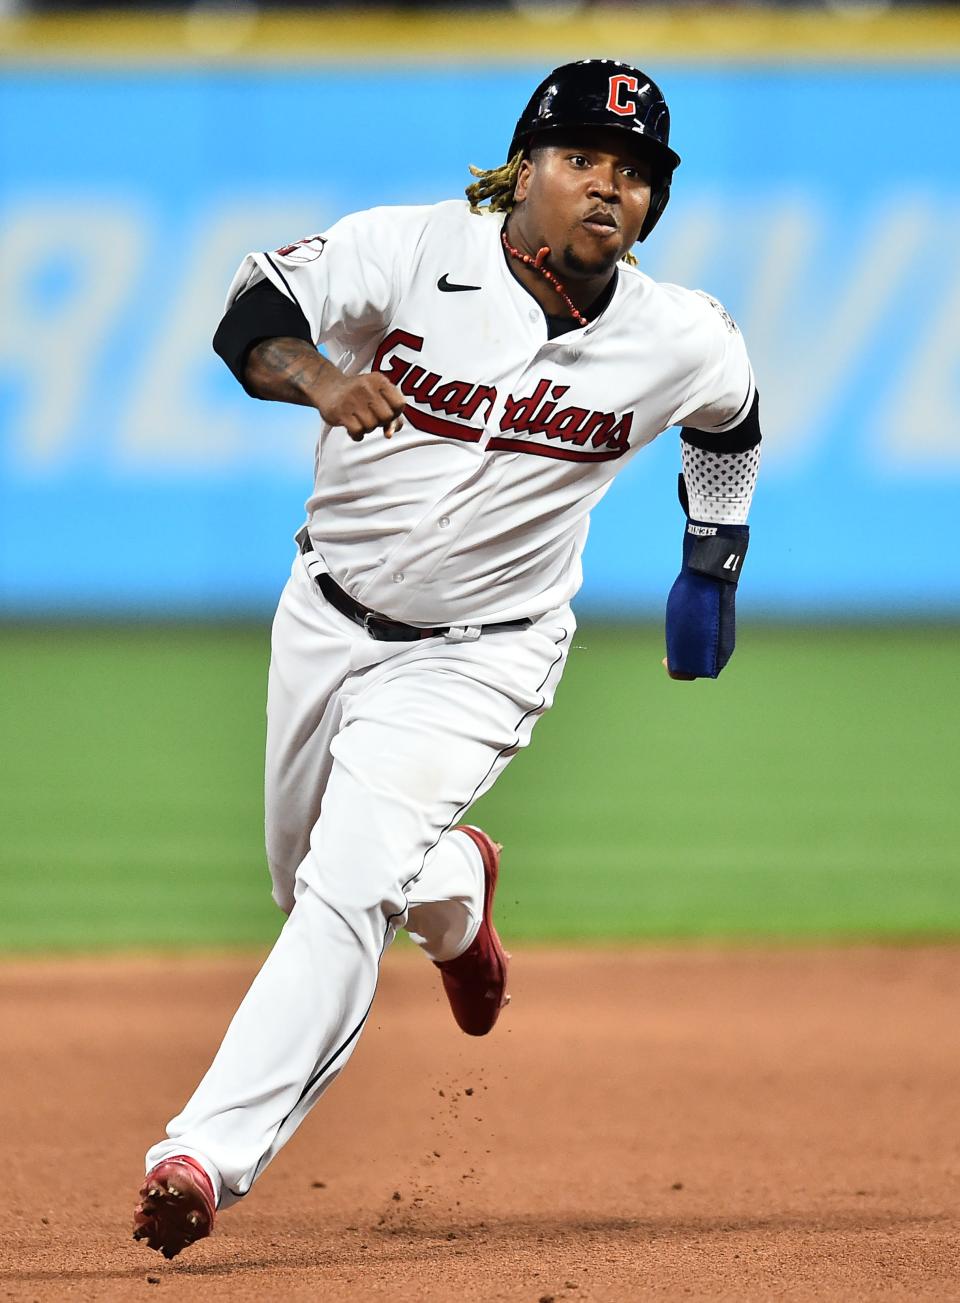 Apr 15, 2022; Cleveland, Ohio, USA; Cleveland Guardians third baseman Jose Ramirez advances to third on a hit by Cleveland Guardians designated hitter Franmil Reyes (not pictured) during the seventh inning against the San Francisco Giants at Progressive Field. Mandatory Credit: Ken Blaze-USA TODAY Sports